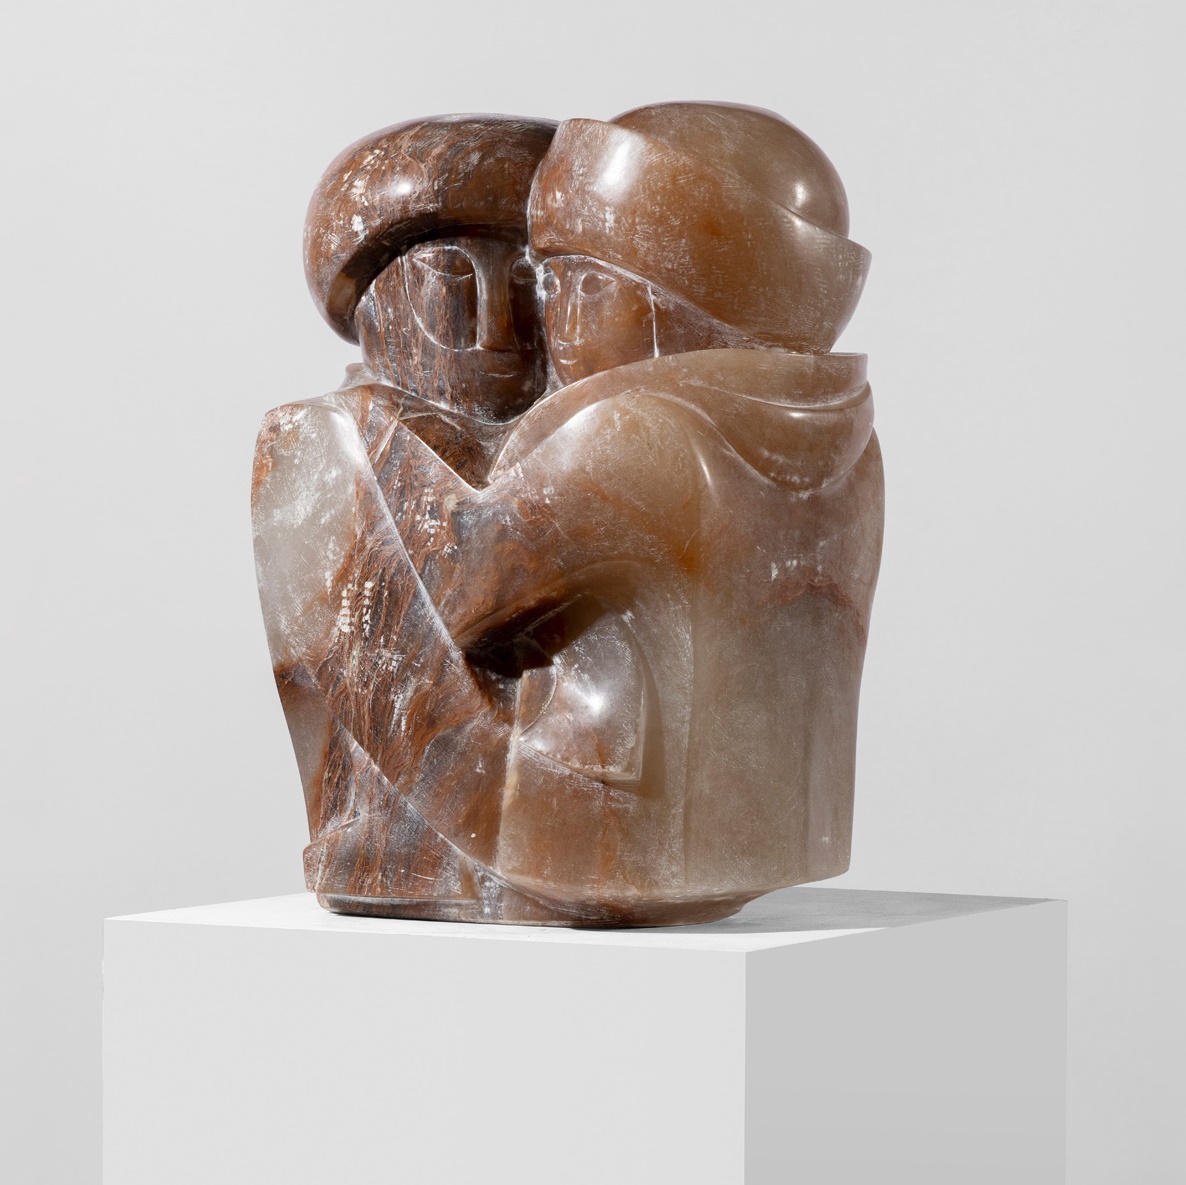 LOT 203 | § GEORGE KENNETHSON (BRITISH 1910-1994) | FATHER AND CHILD, 1960S | £12,000 - £18,000 + fees